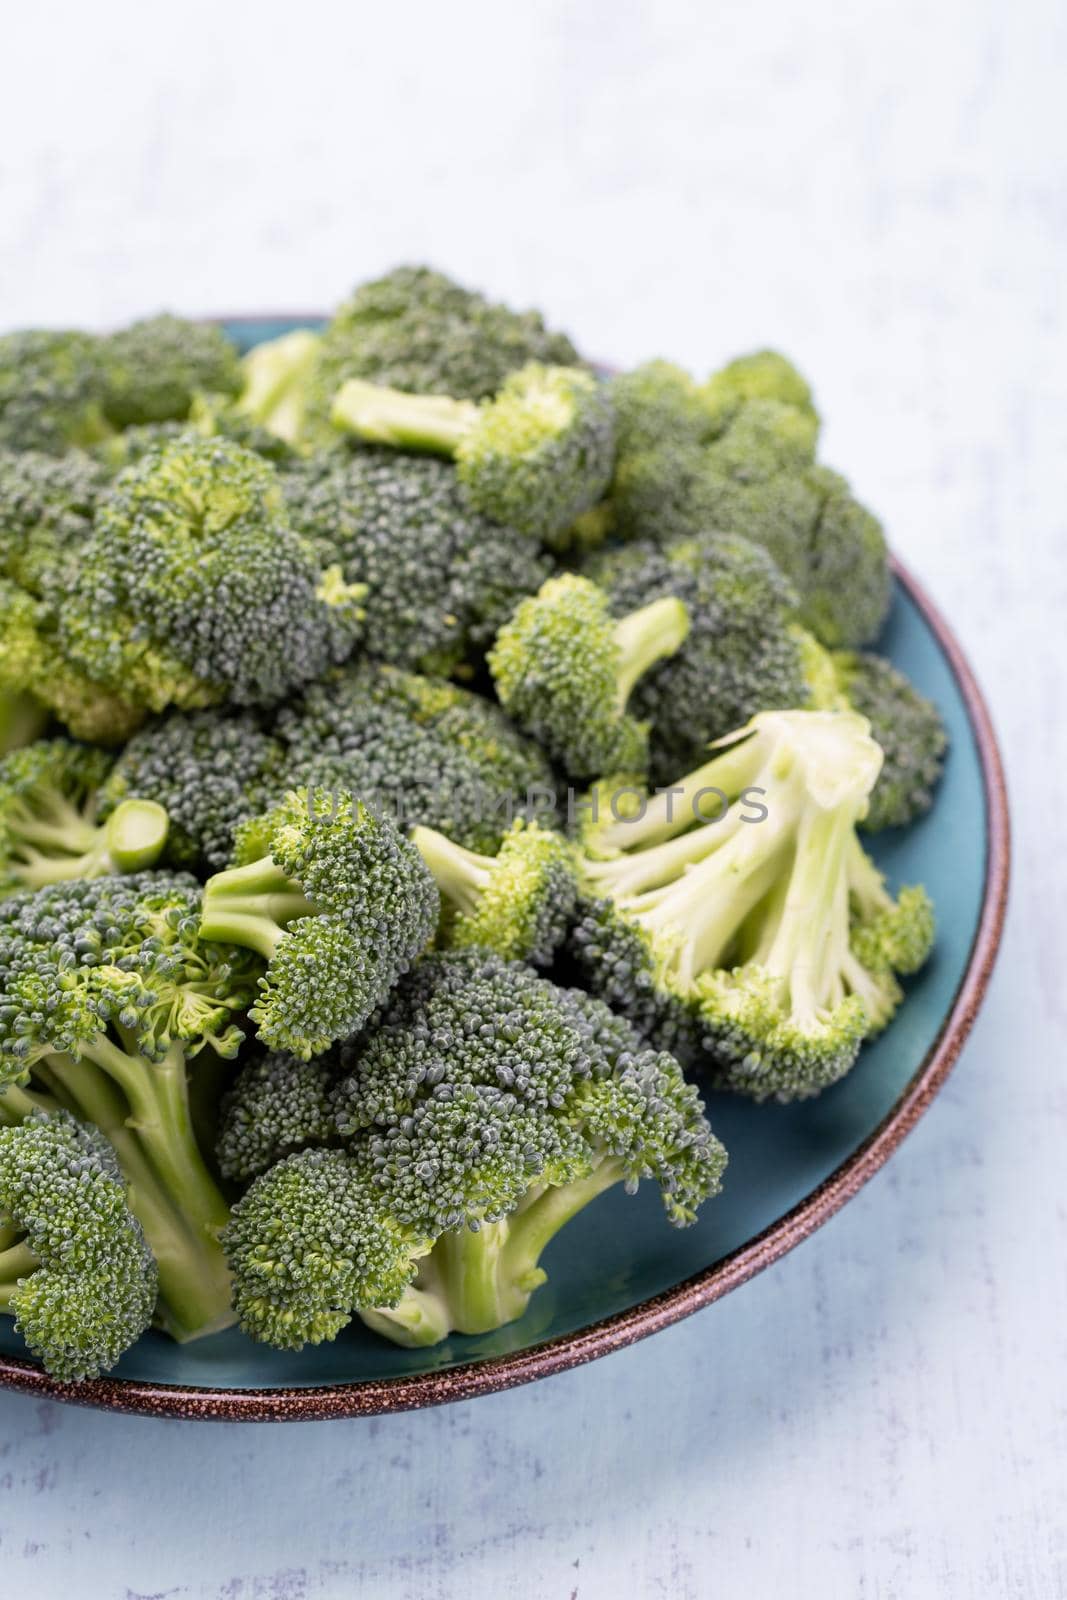 Healthy Green Organic Raw Broccoli Florets Ready for Cooking